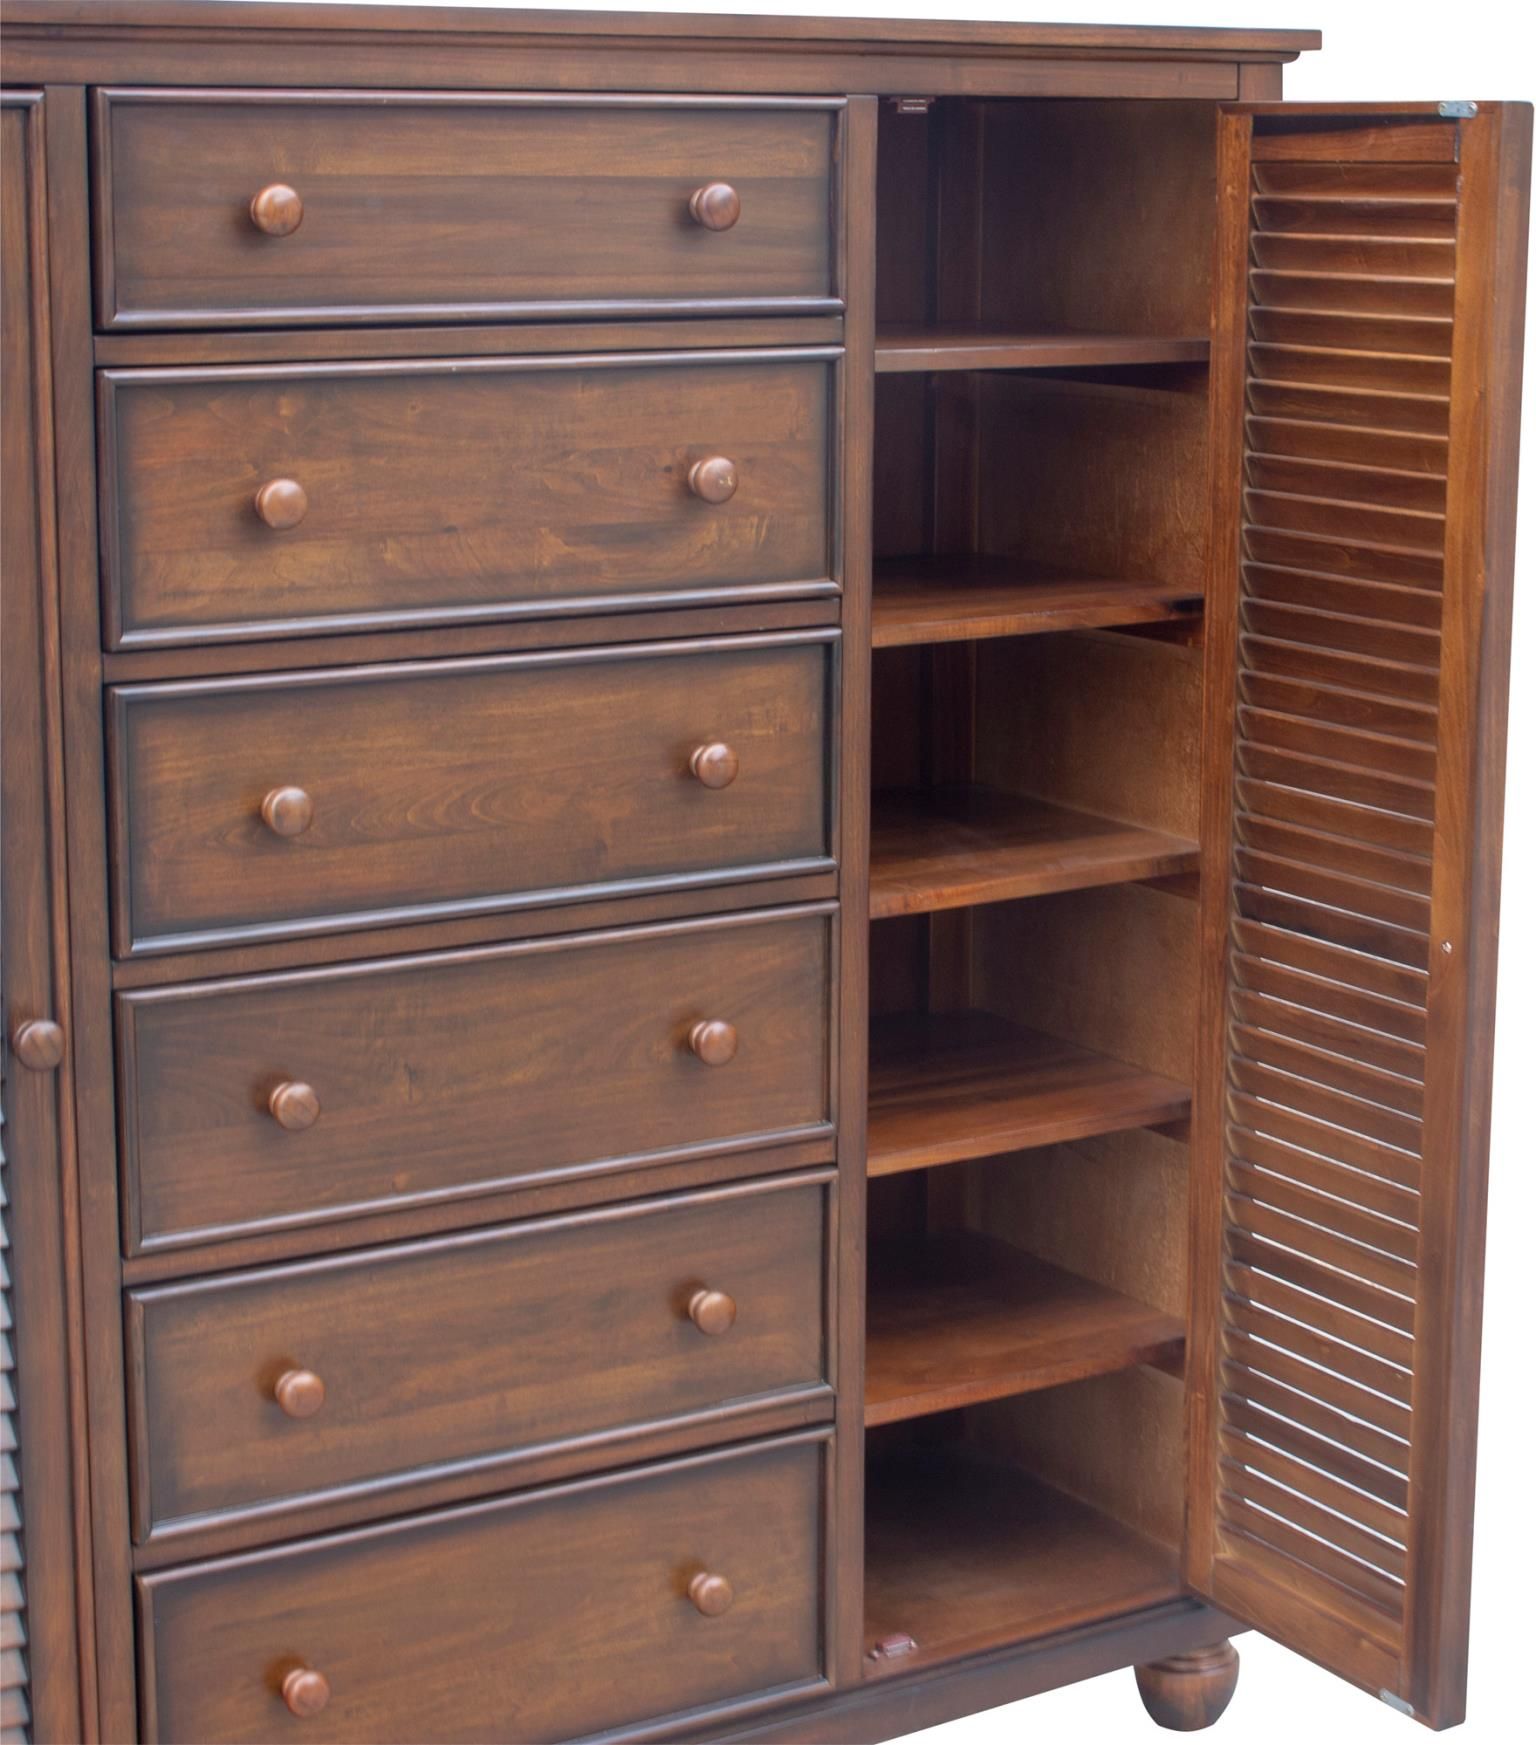 Nantucket Chifferobe in allspice brown, crafted from solid wood, featuring six drawers, two doors, and bun feet. Door open.